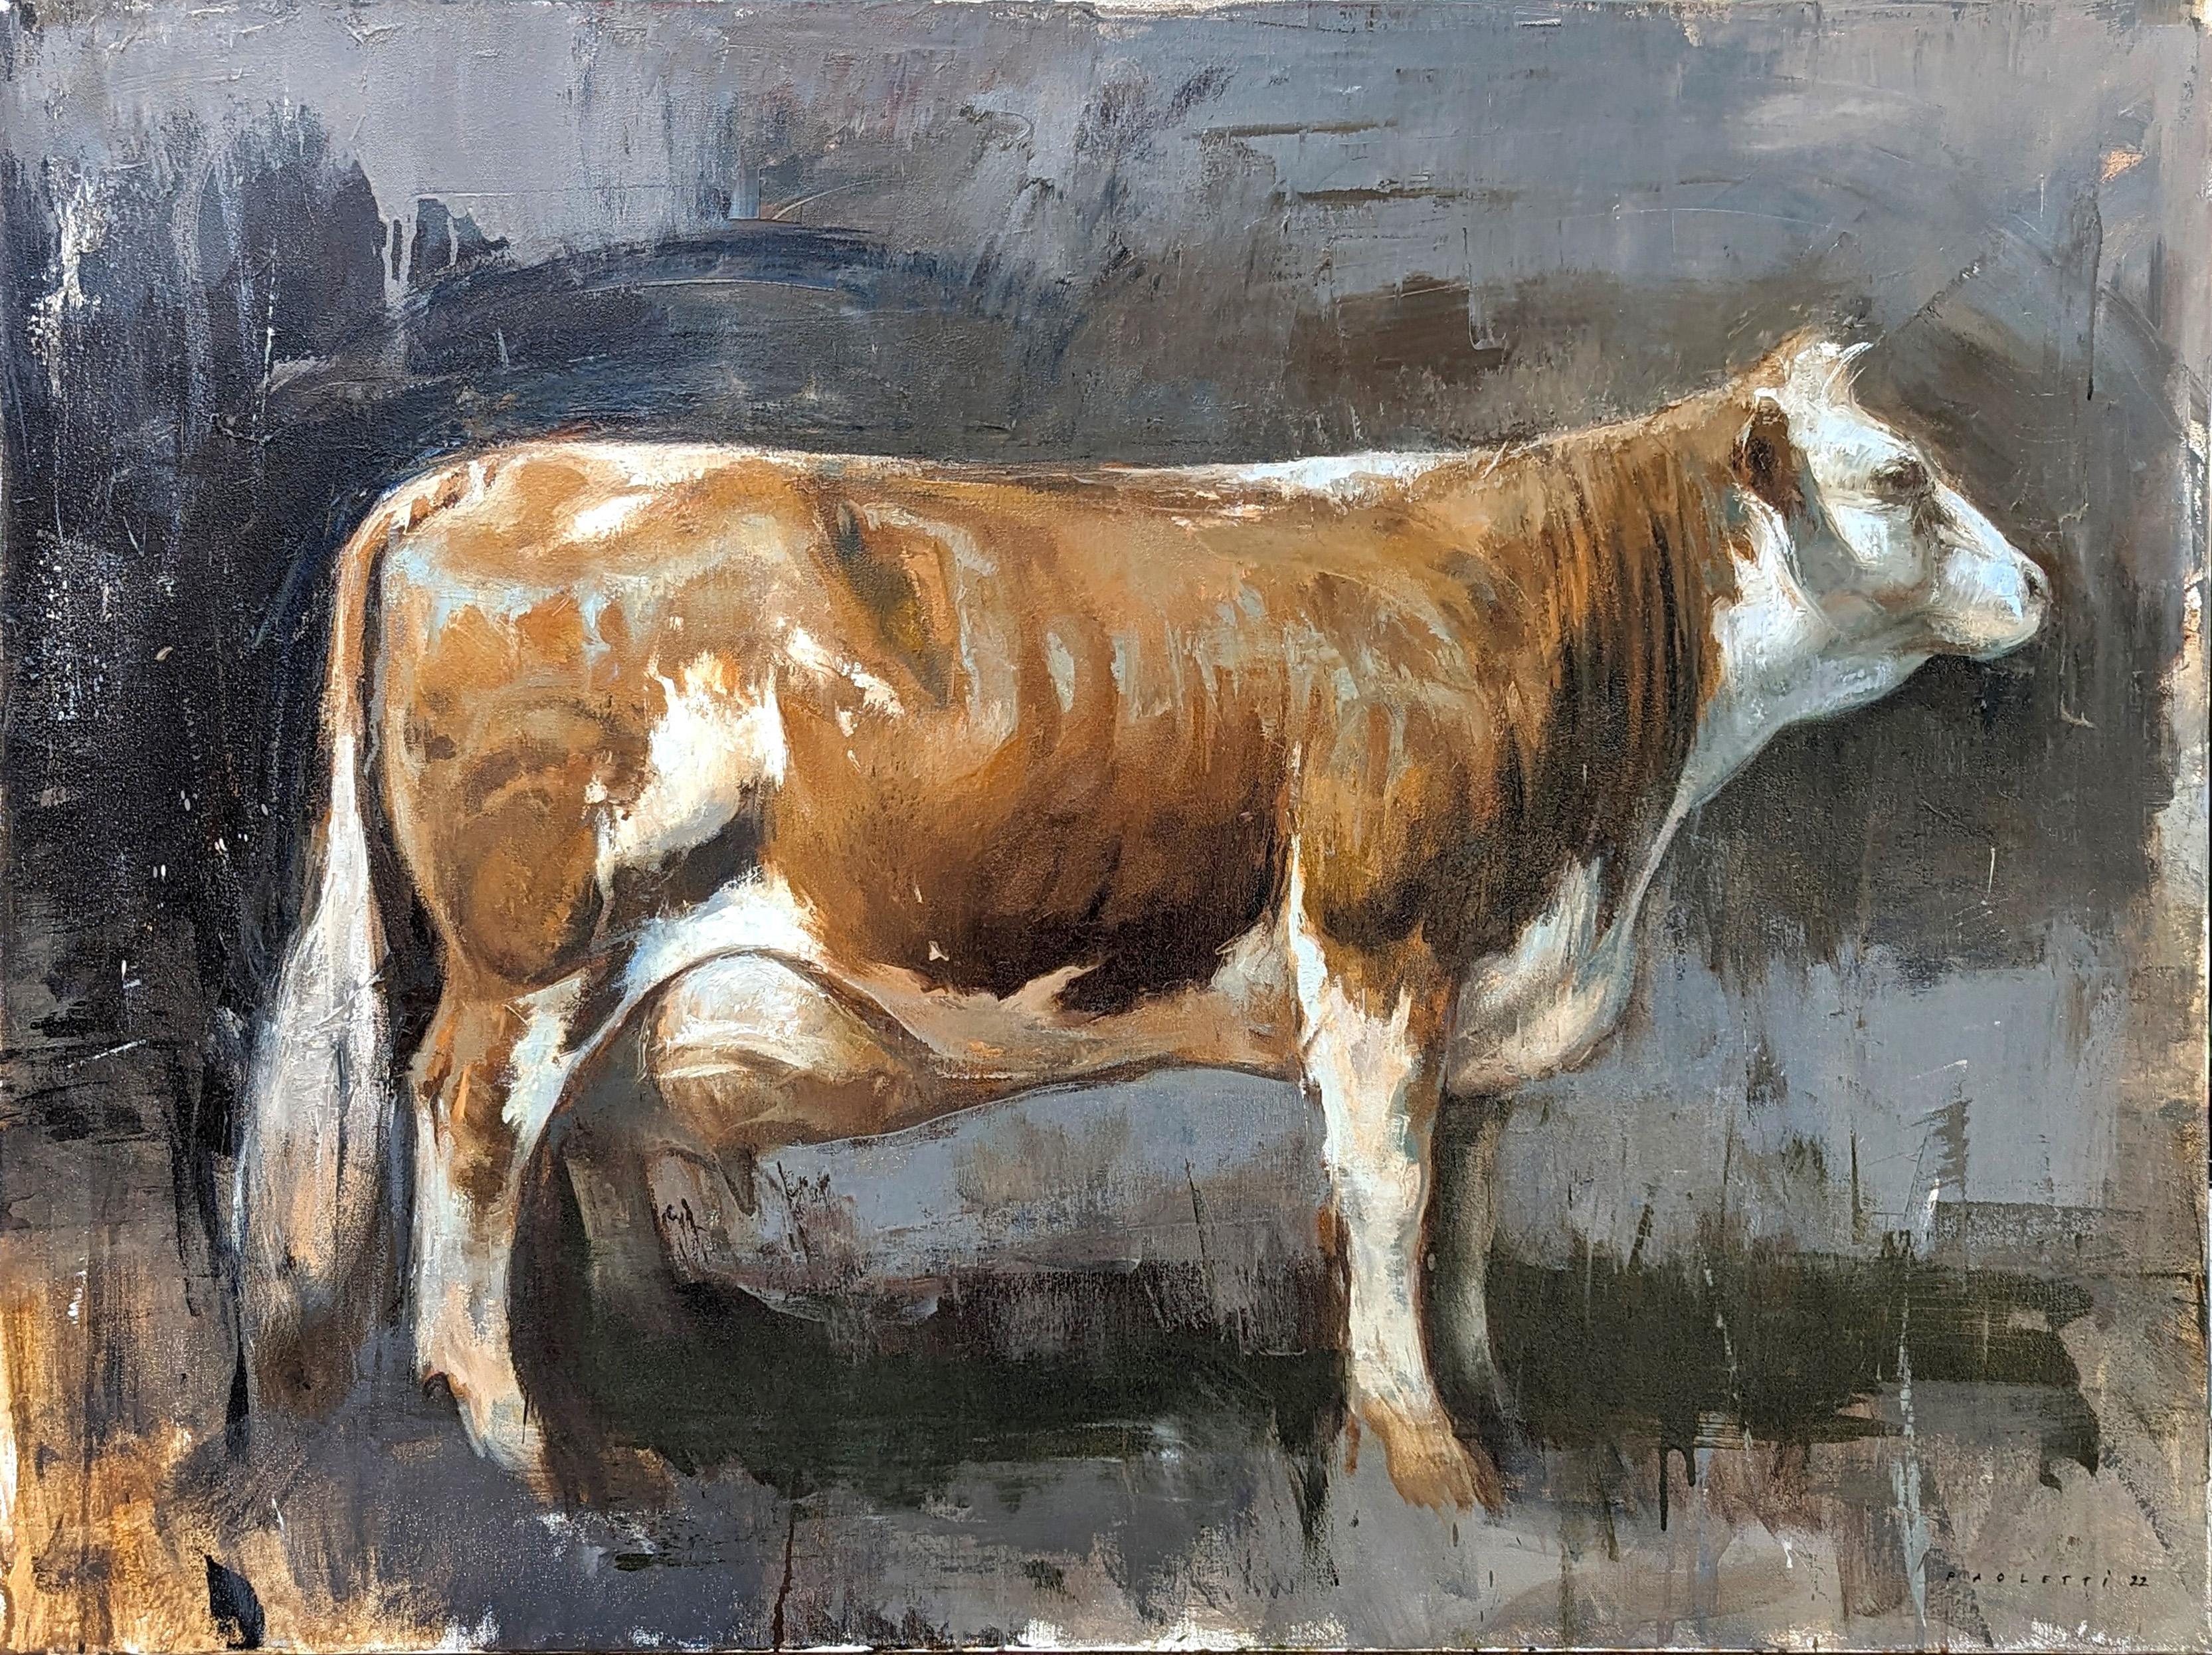 Matthew Paoletti Abstract Painting - "How Now" Contemporary Naturalistic Rural Animal Painting of a Brown Cow